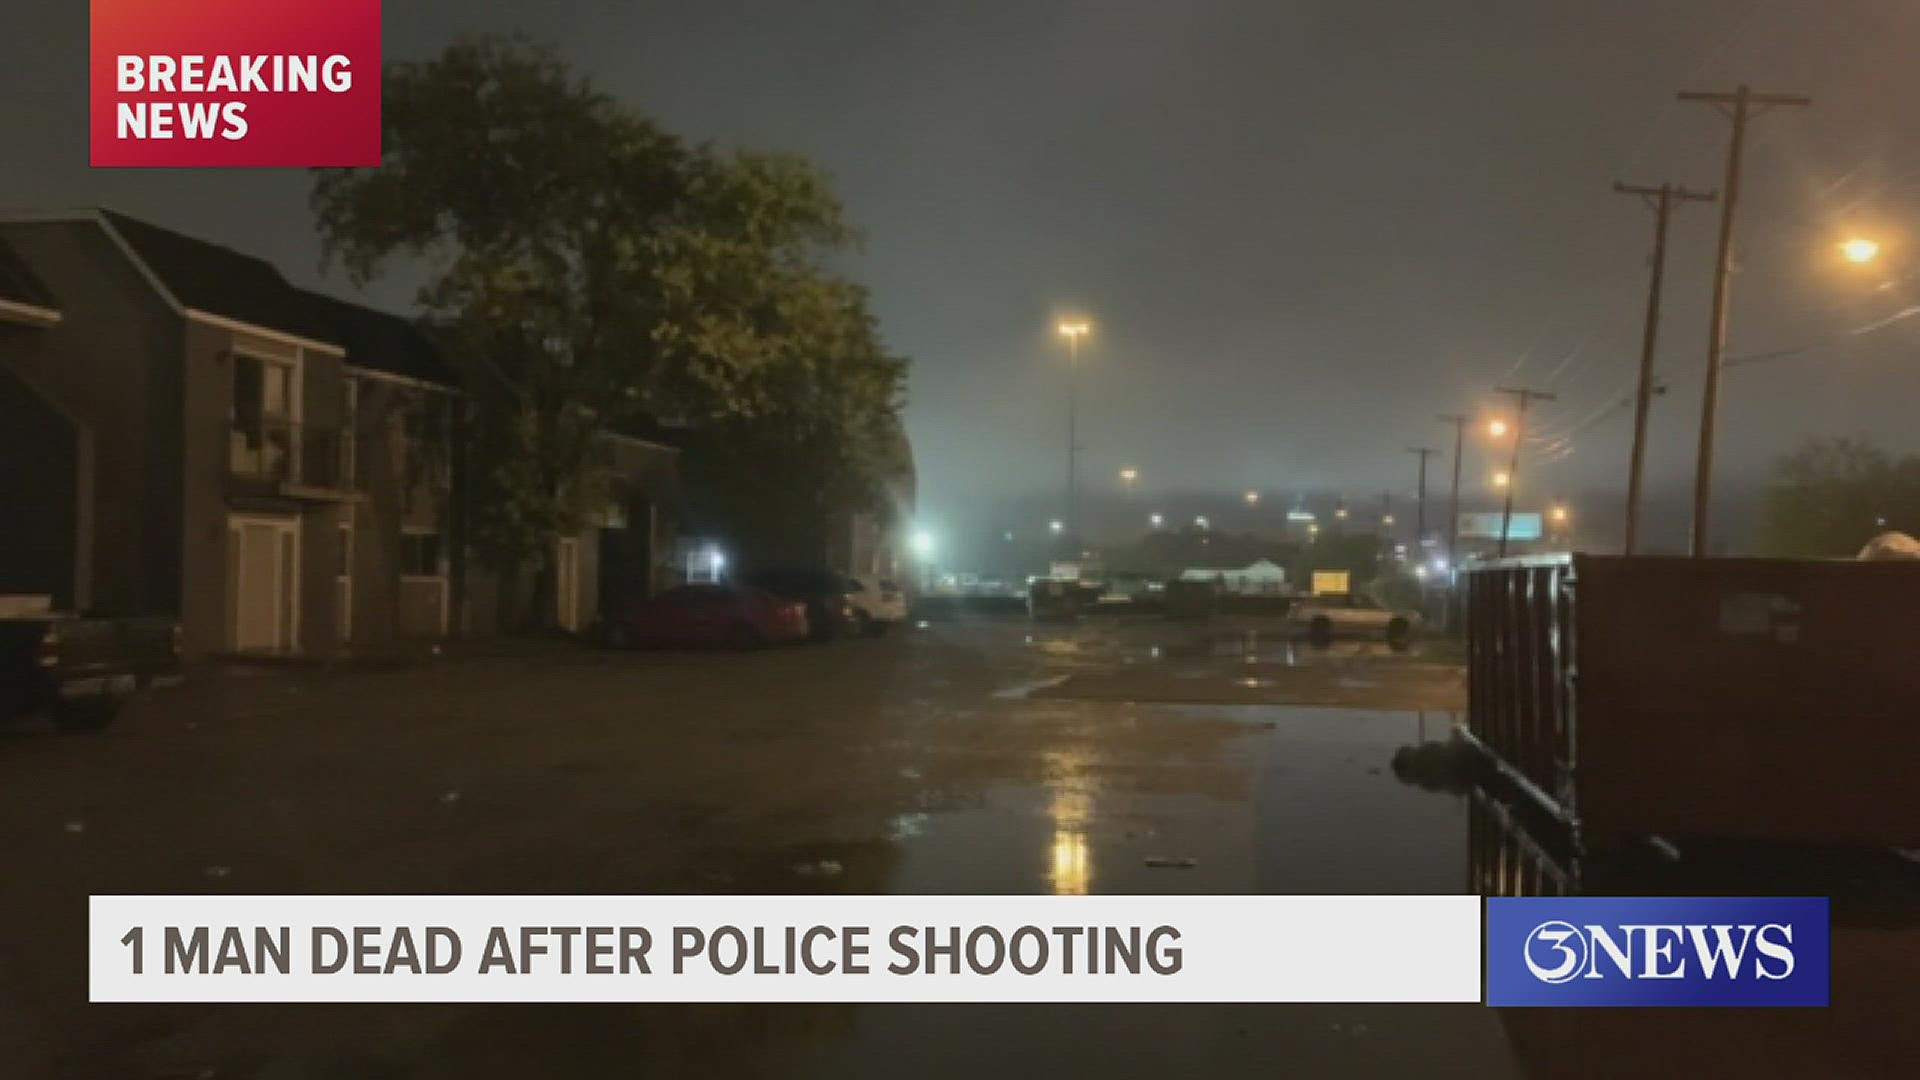 A Corpus Christi police officer shot and killed a man Friday evening after responding to a domestic disturbance at a Westside apartment complex.